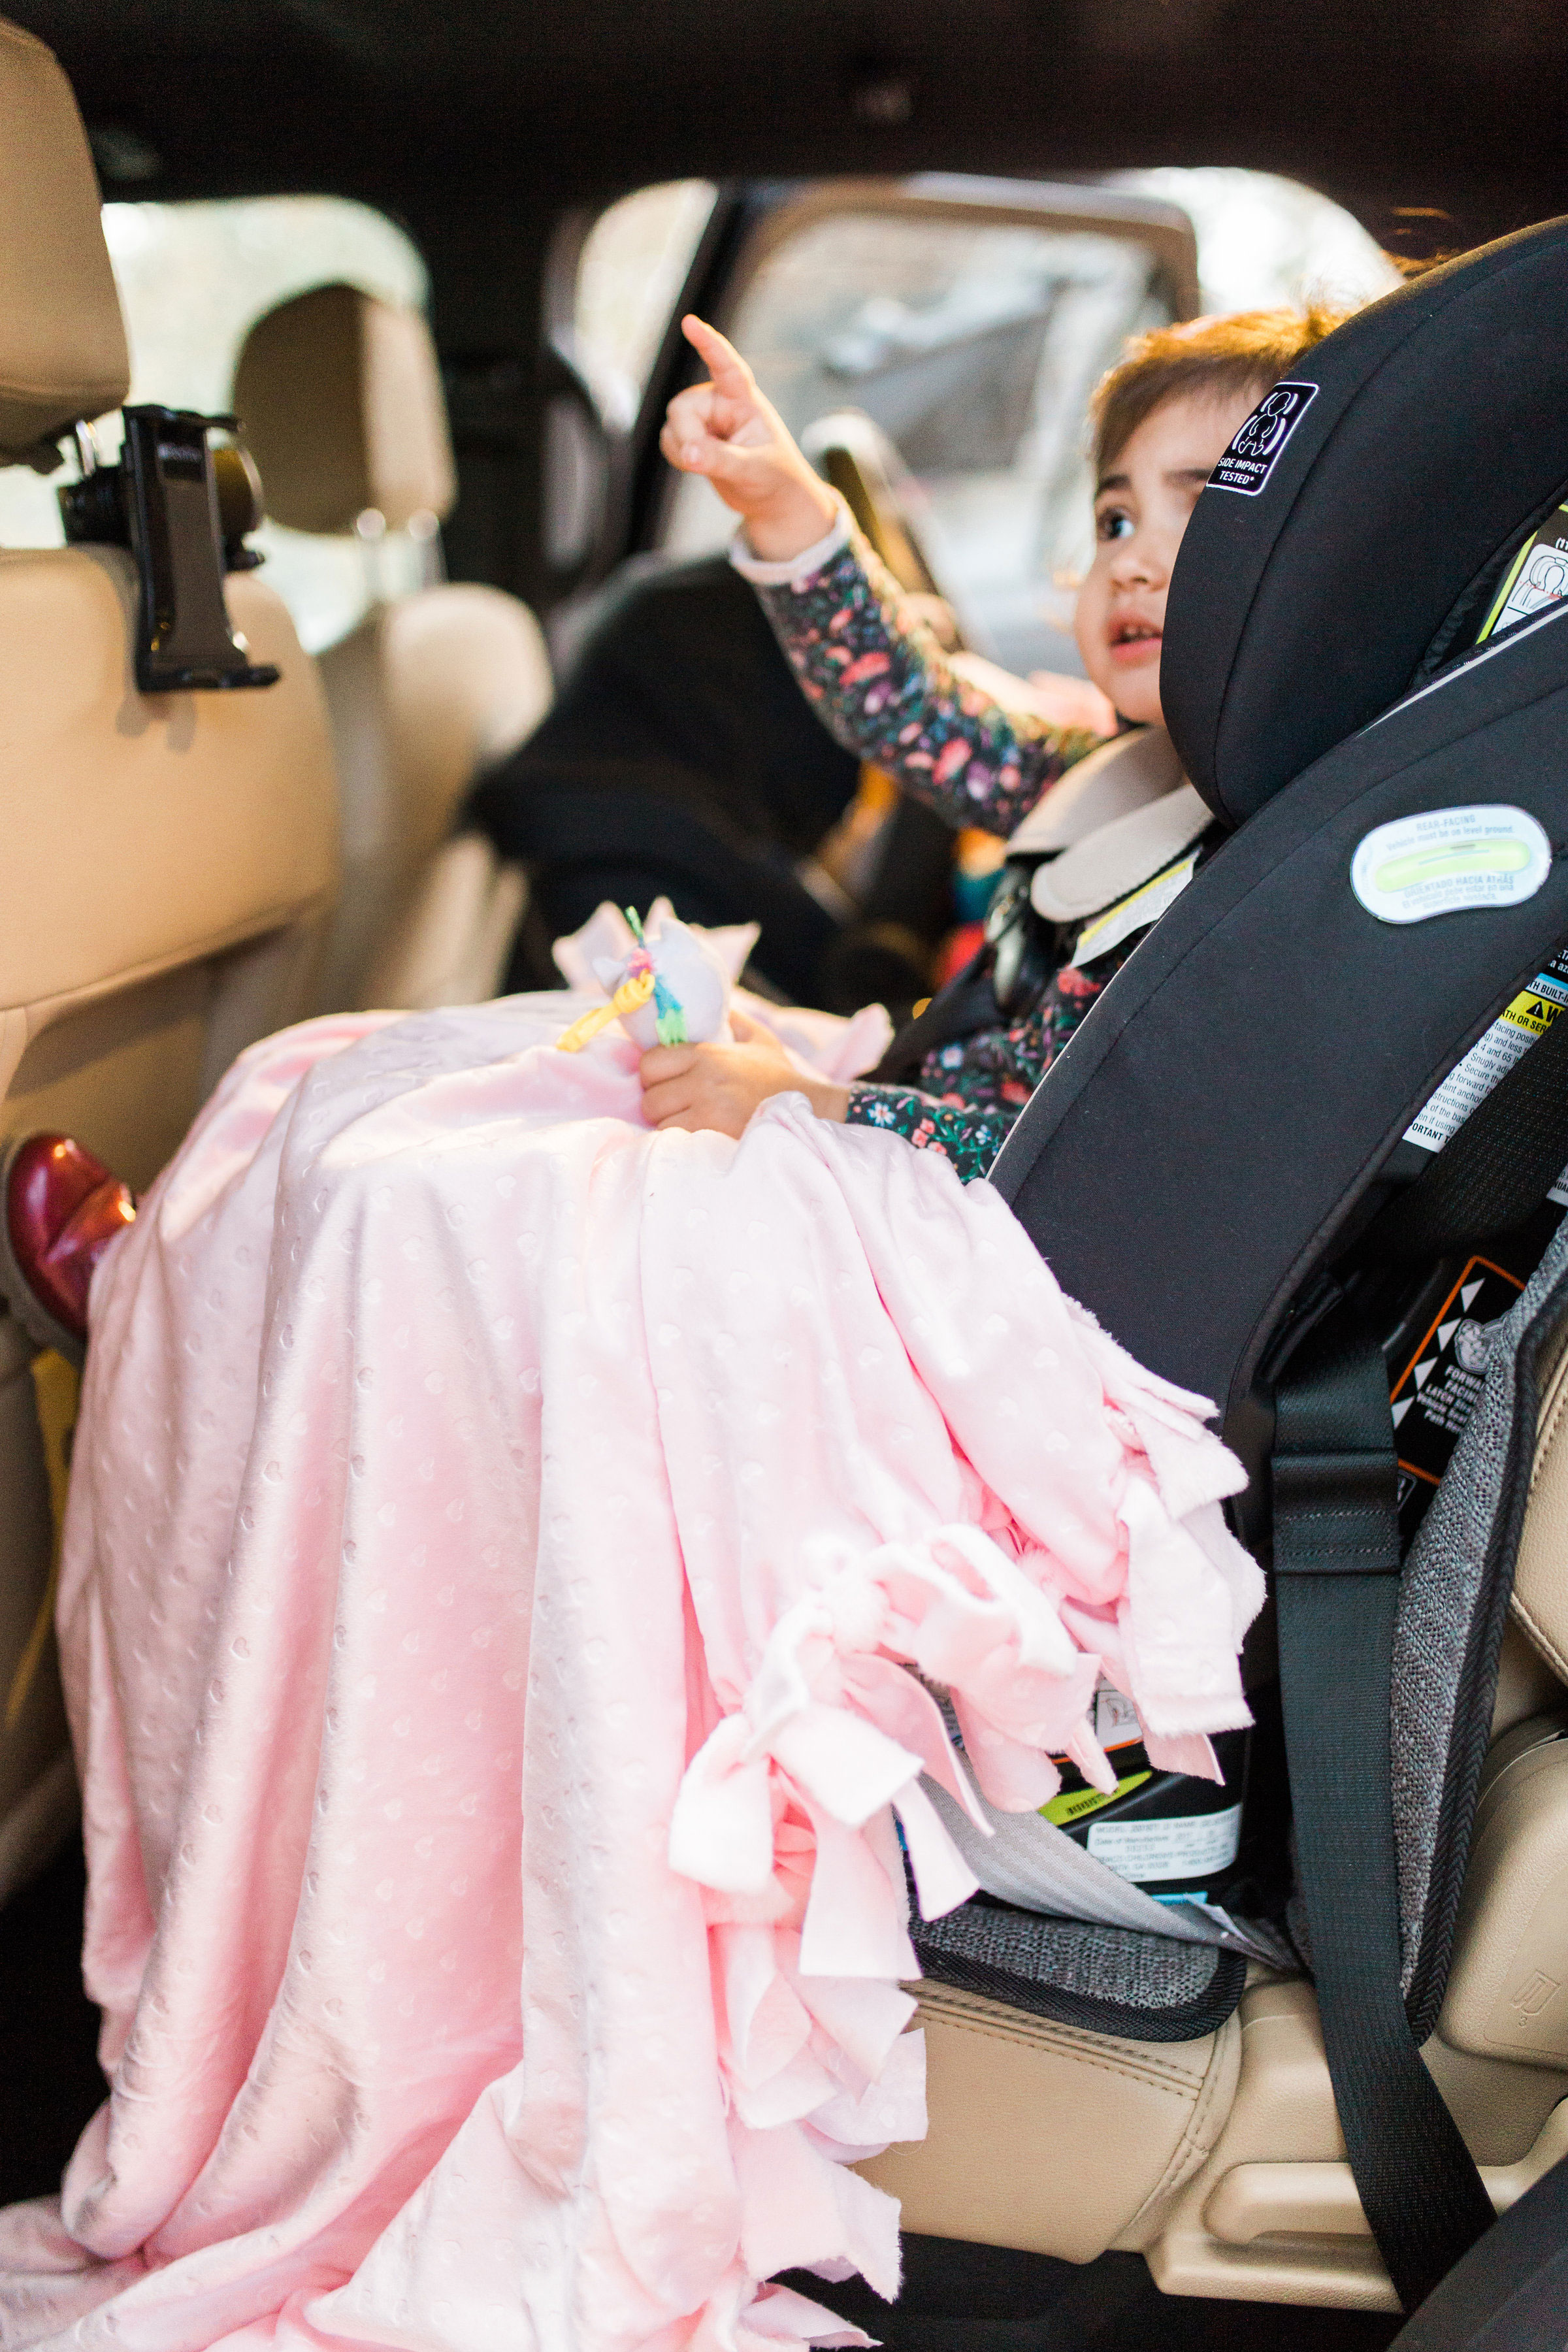 Make one of these easy kid-friendly DIY no-sew car blankets for your family' - Easy Kid-Friendly DIY No-Sew Car Blanket by popular North Carolina blogger Glitter, Inc. s next road trip. Use fleece or minky for a super soft blanket. | glitterinc.com | @glitterinc